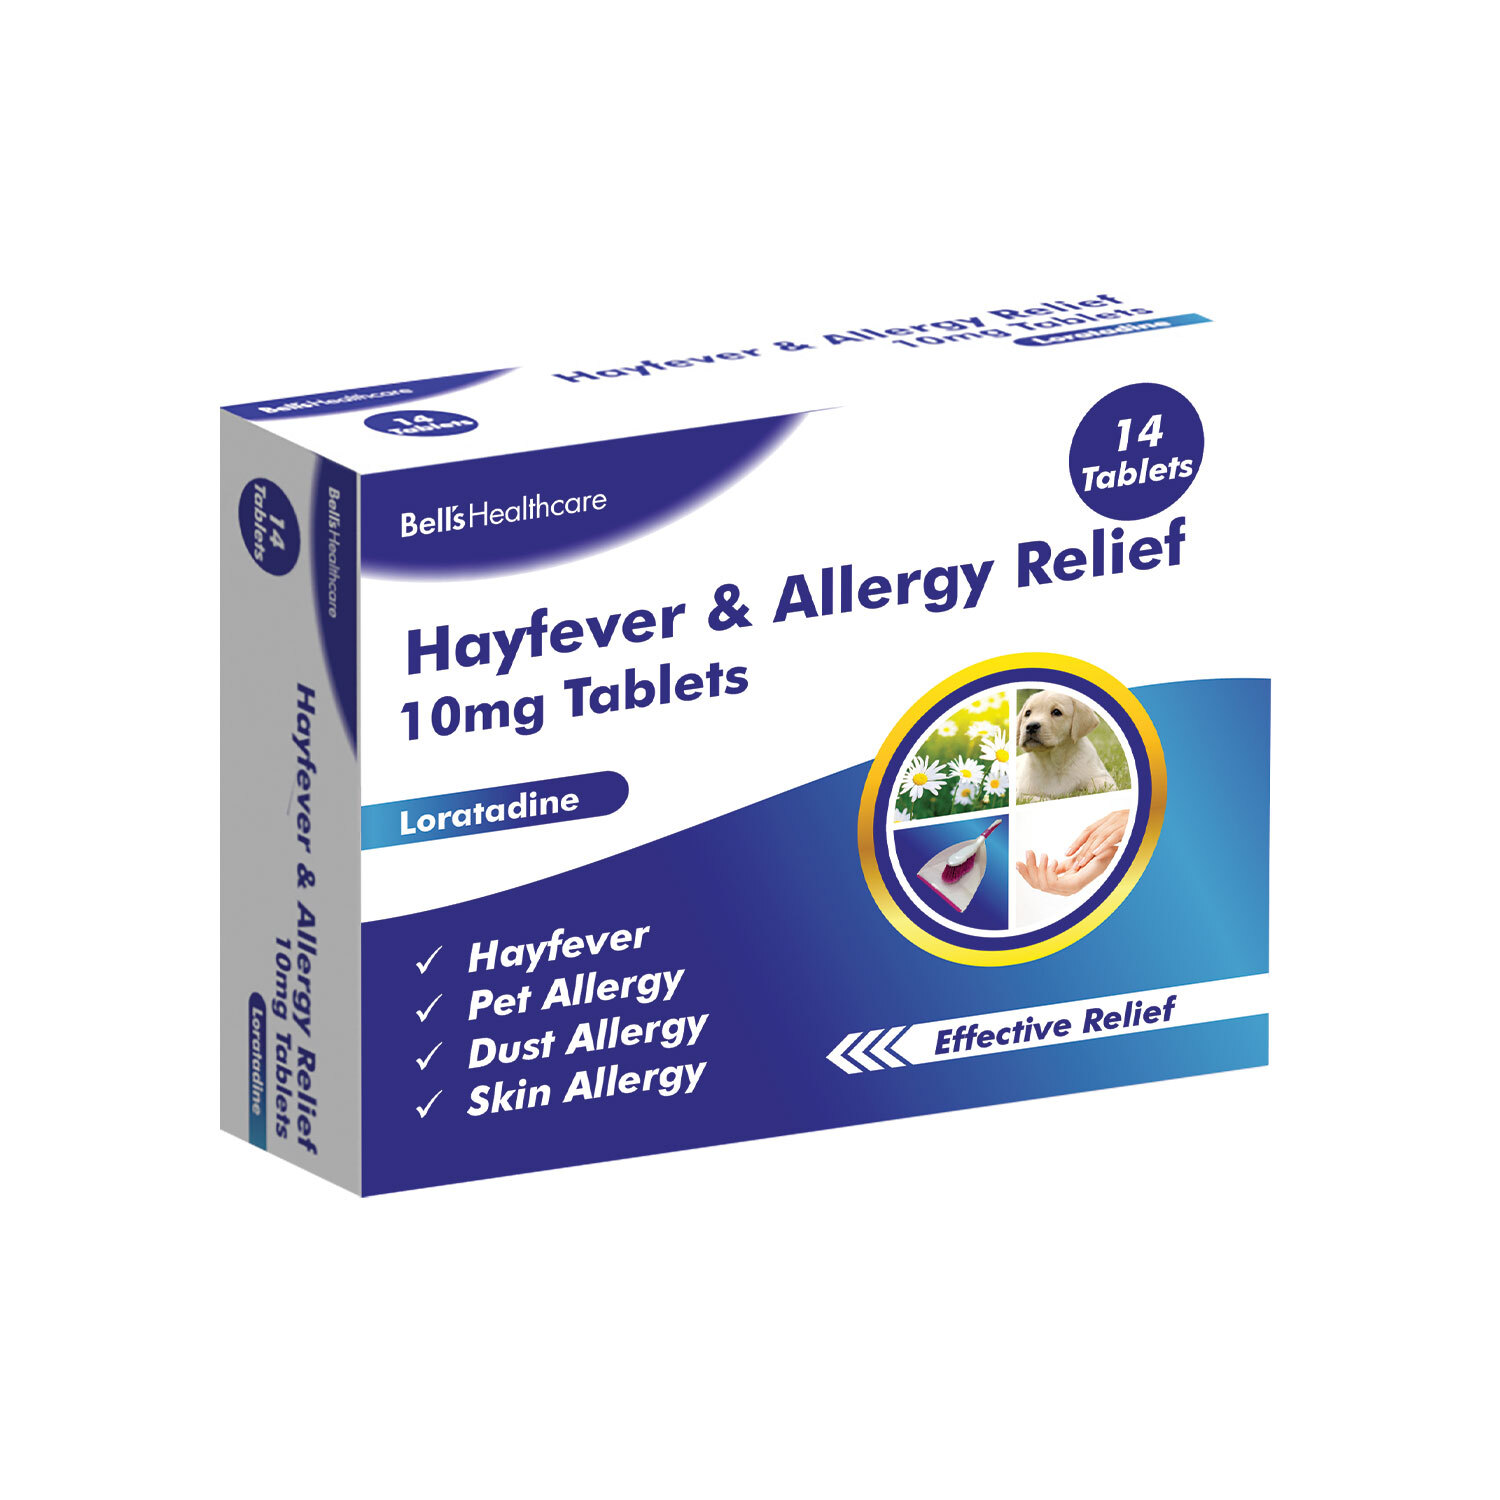 Bell's Healthcare Hayfever & Allergy Relief Loratadine 10mg Tablets - 14 Image